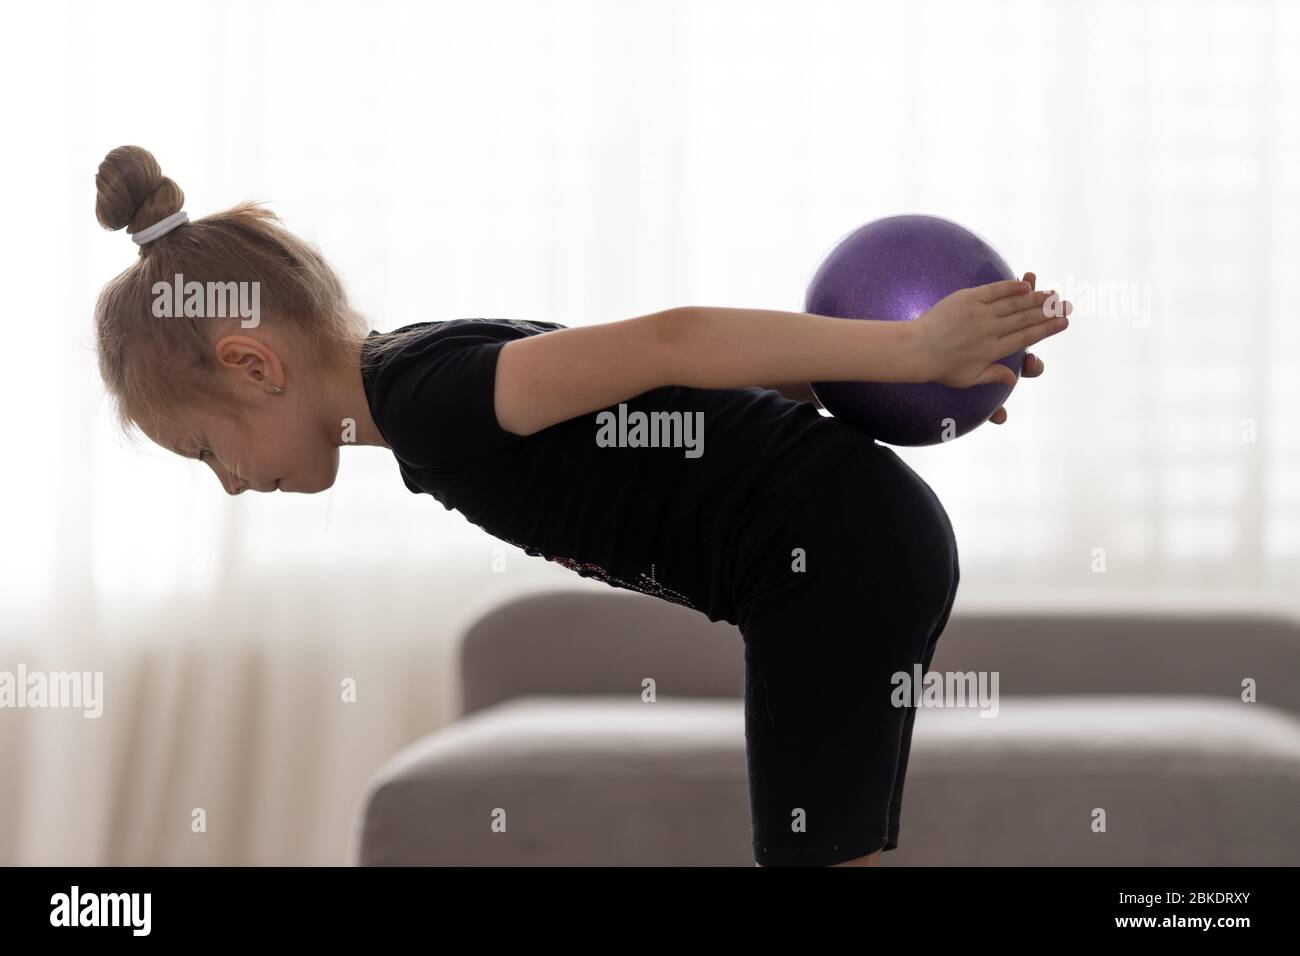 Flexible cute little girl child gymnast doing acrobatic exercise with ball. Sport, training, fitness, active lifestyle concept Stock Photo